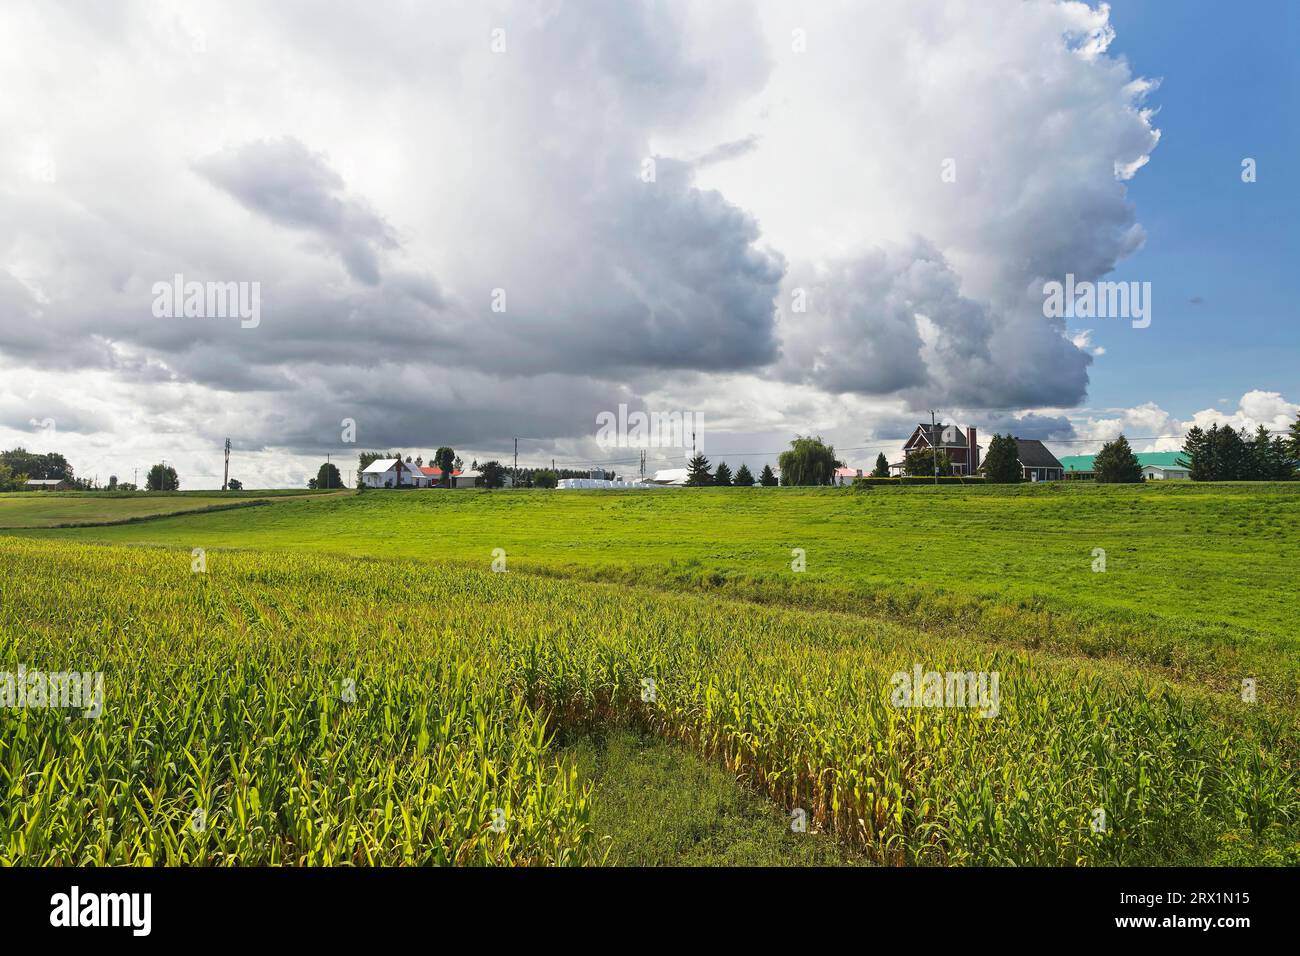 Agriculture, buildings, corn field, farmland, Province of Quebec, Canada Stock Photo